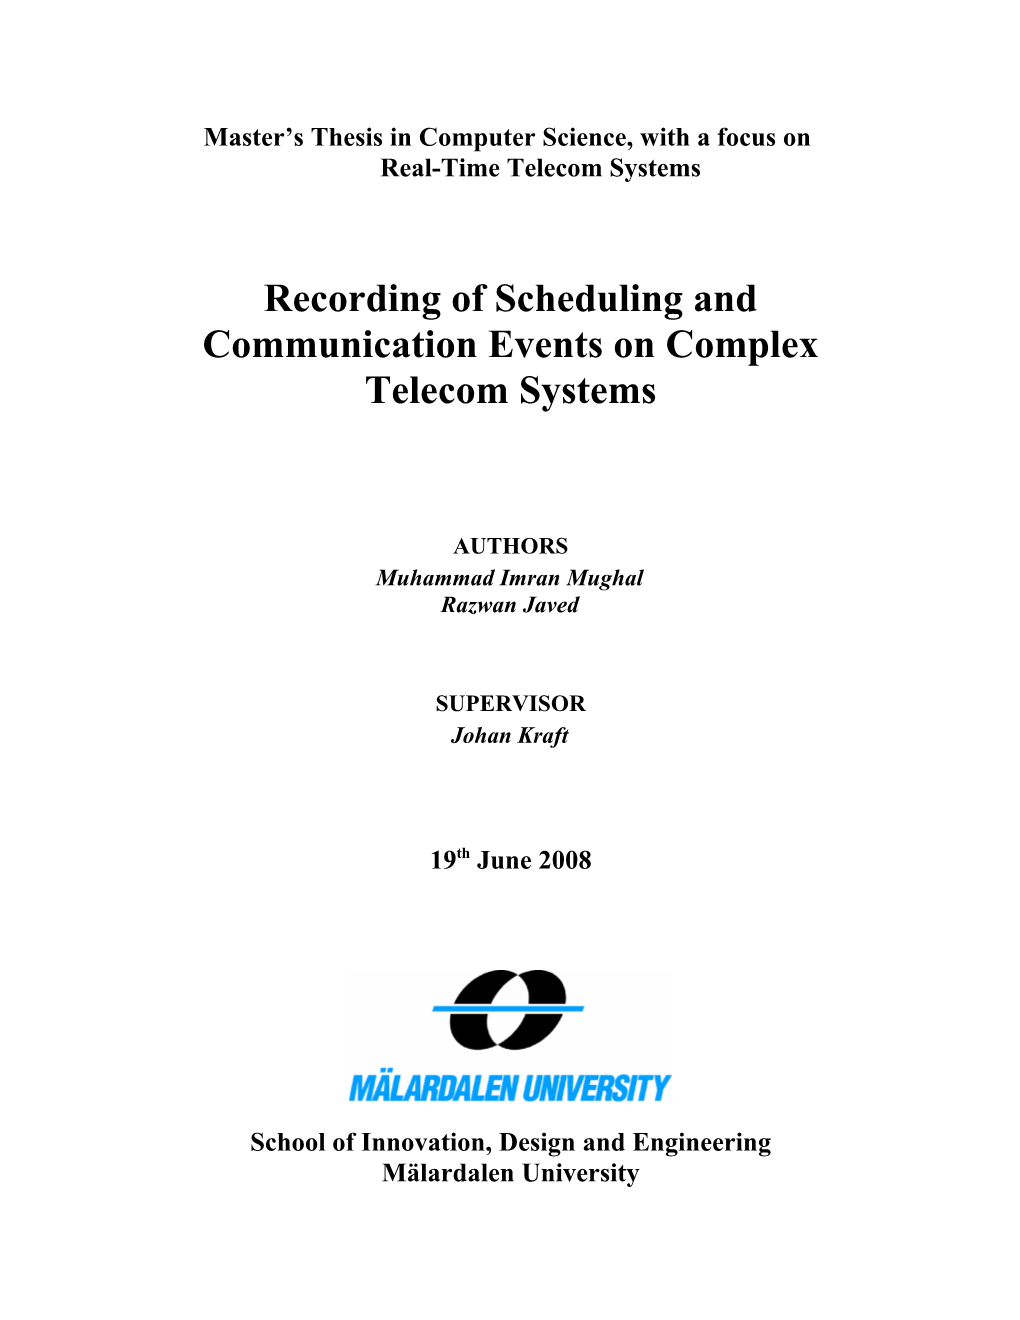 Recording of Scheduling and Communication Events on Complex Telecom Systems